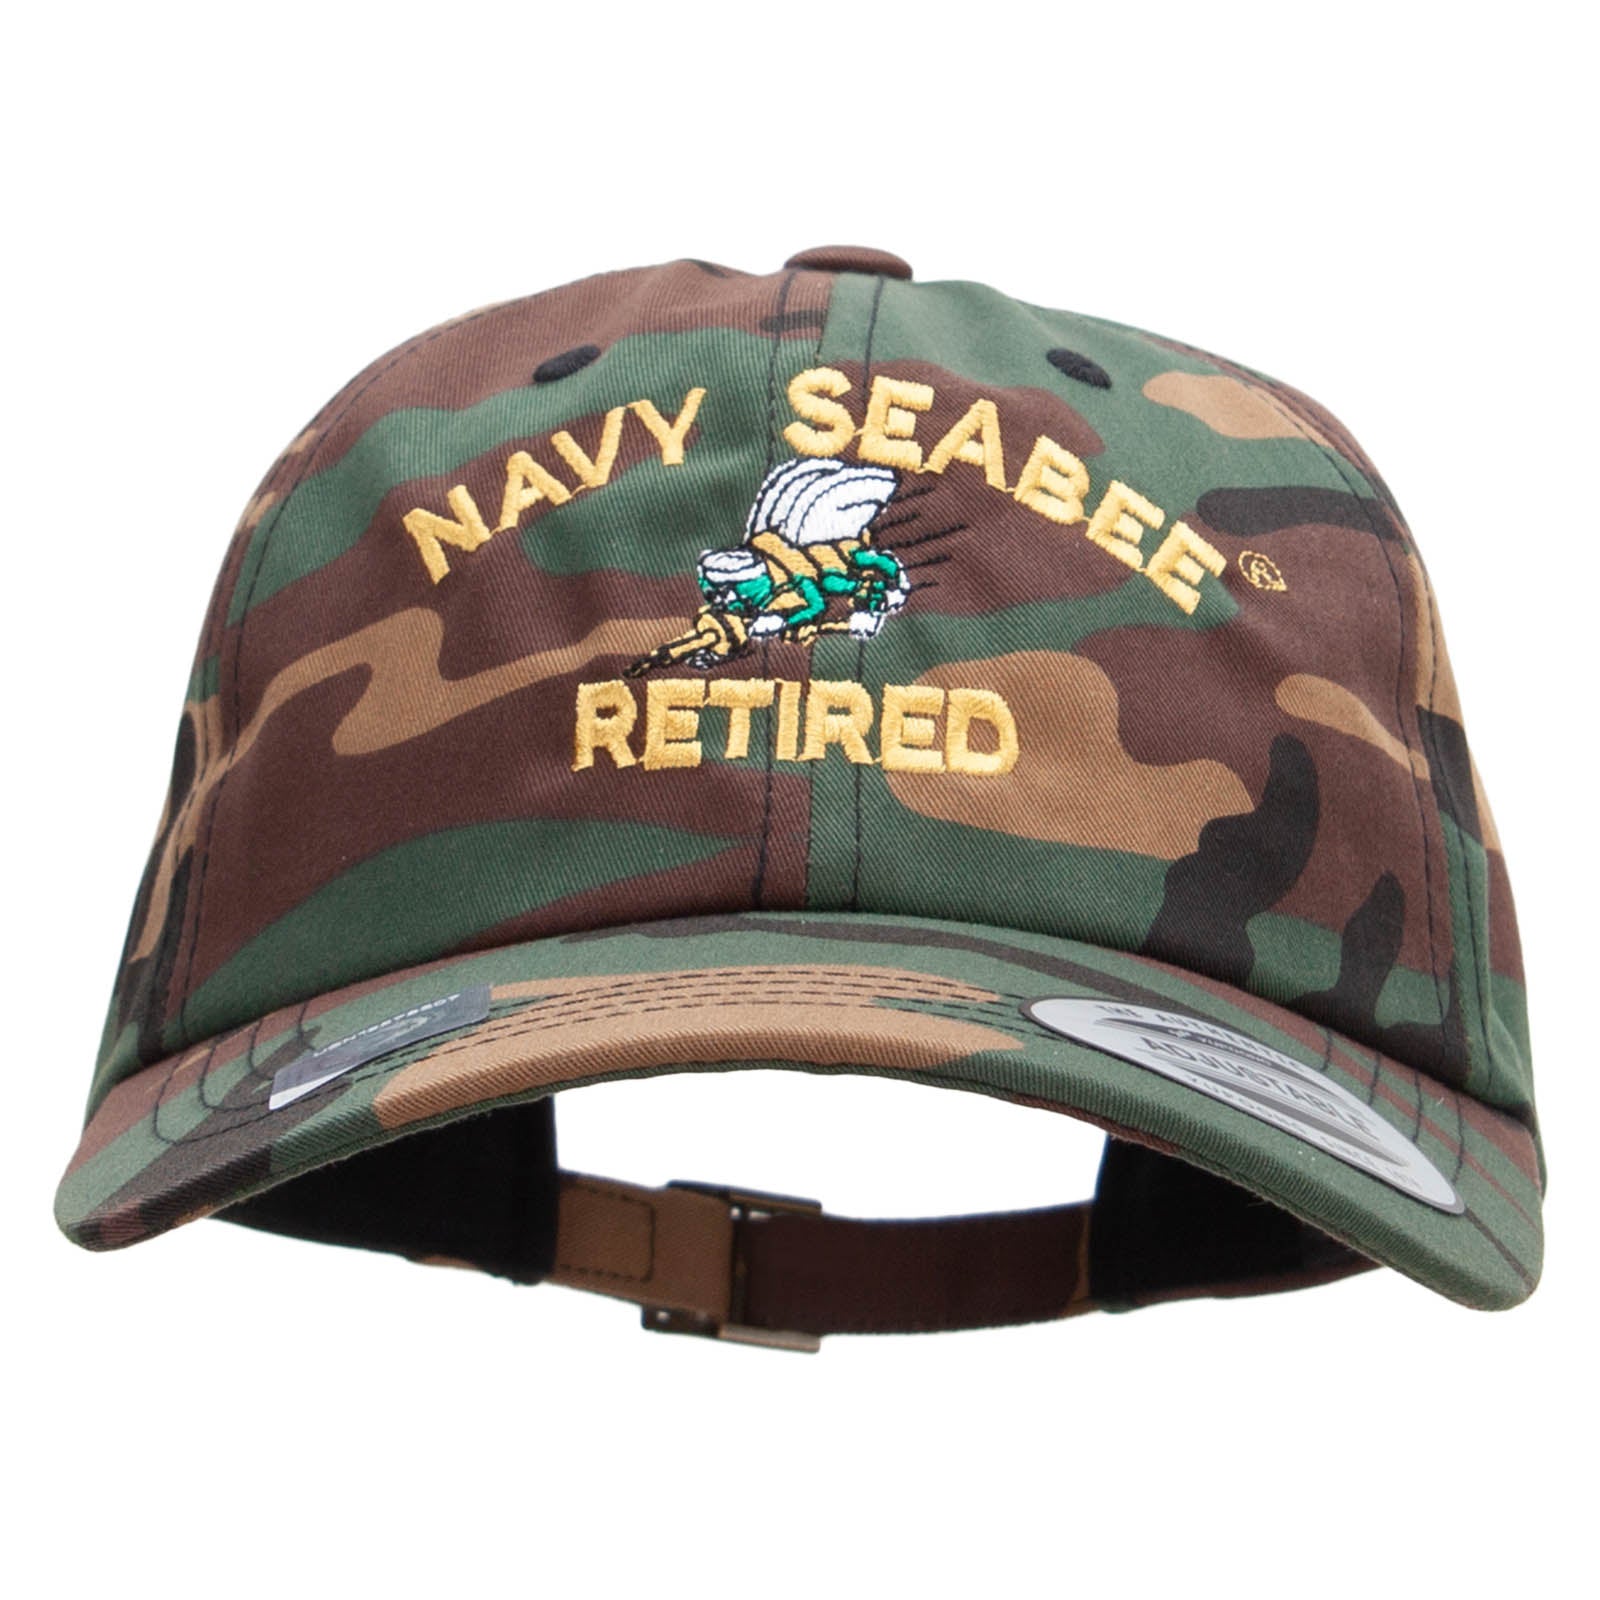 Licensed US Navy Seabee Retired Unstructured Low Profile 6 panel Cotton Cap - Green Camo OSFM